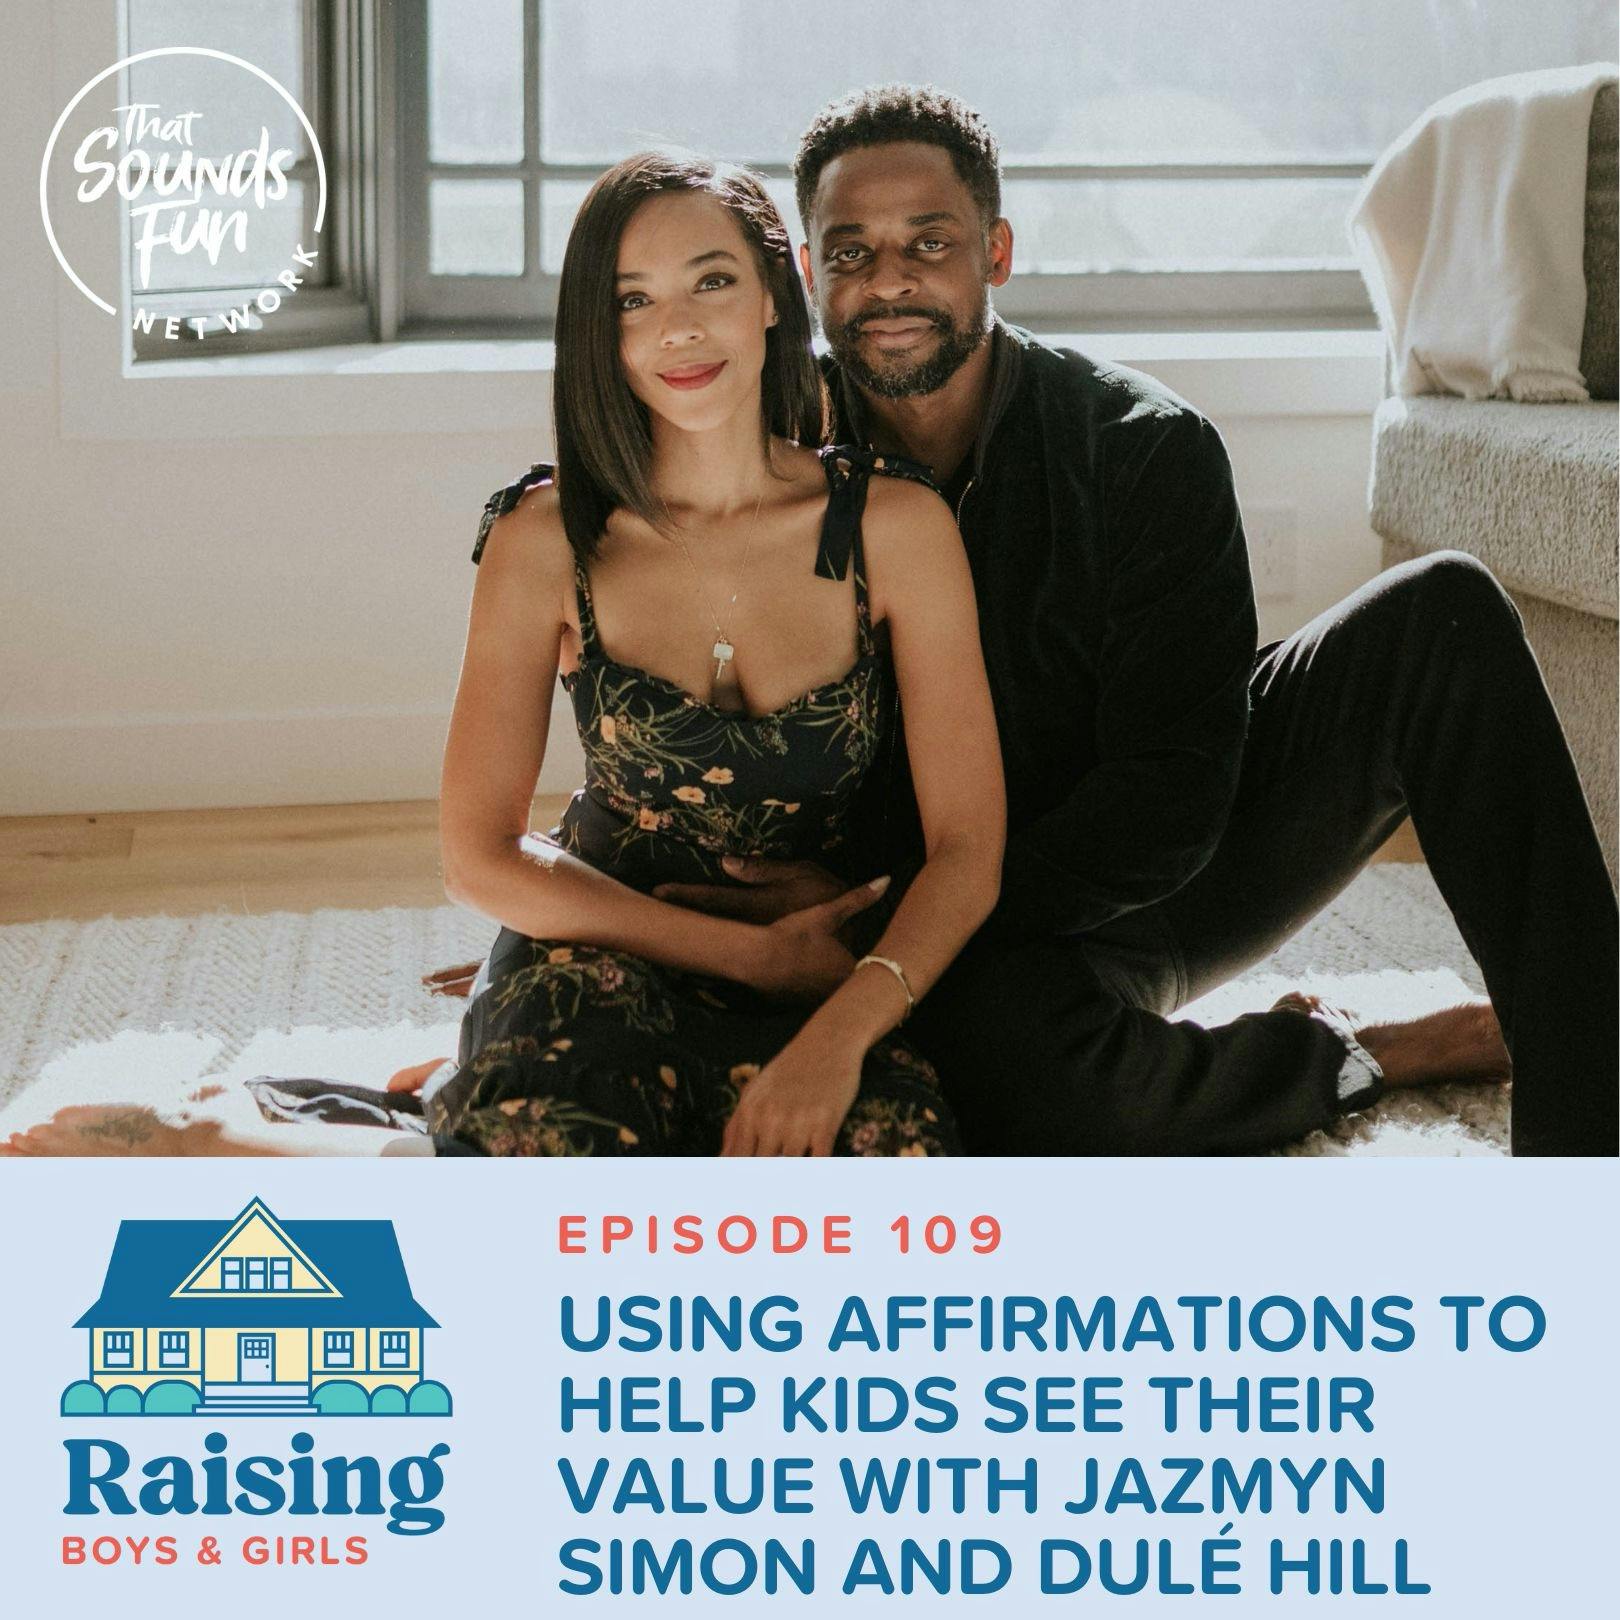 Episode 109: Using Affirmations to Help Kids See Their Value with Jazmyn Simon and Dulé Hill